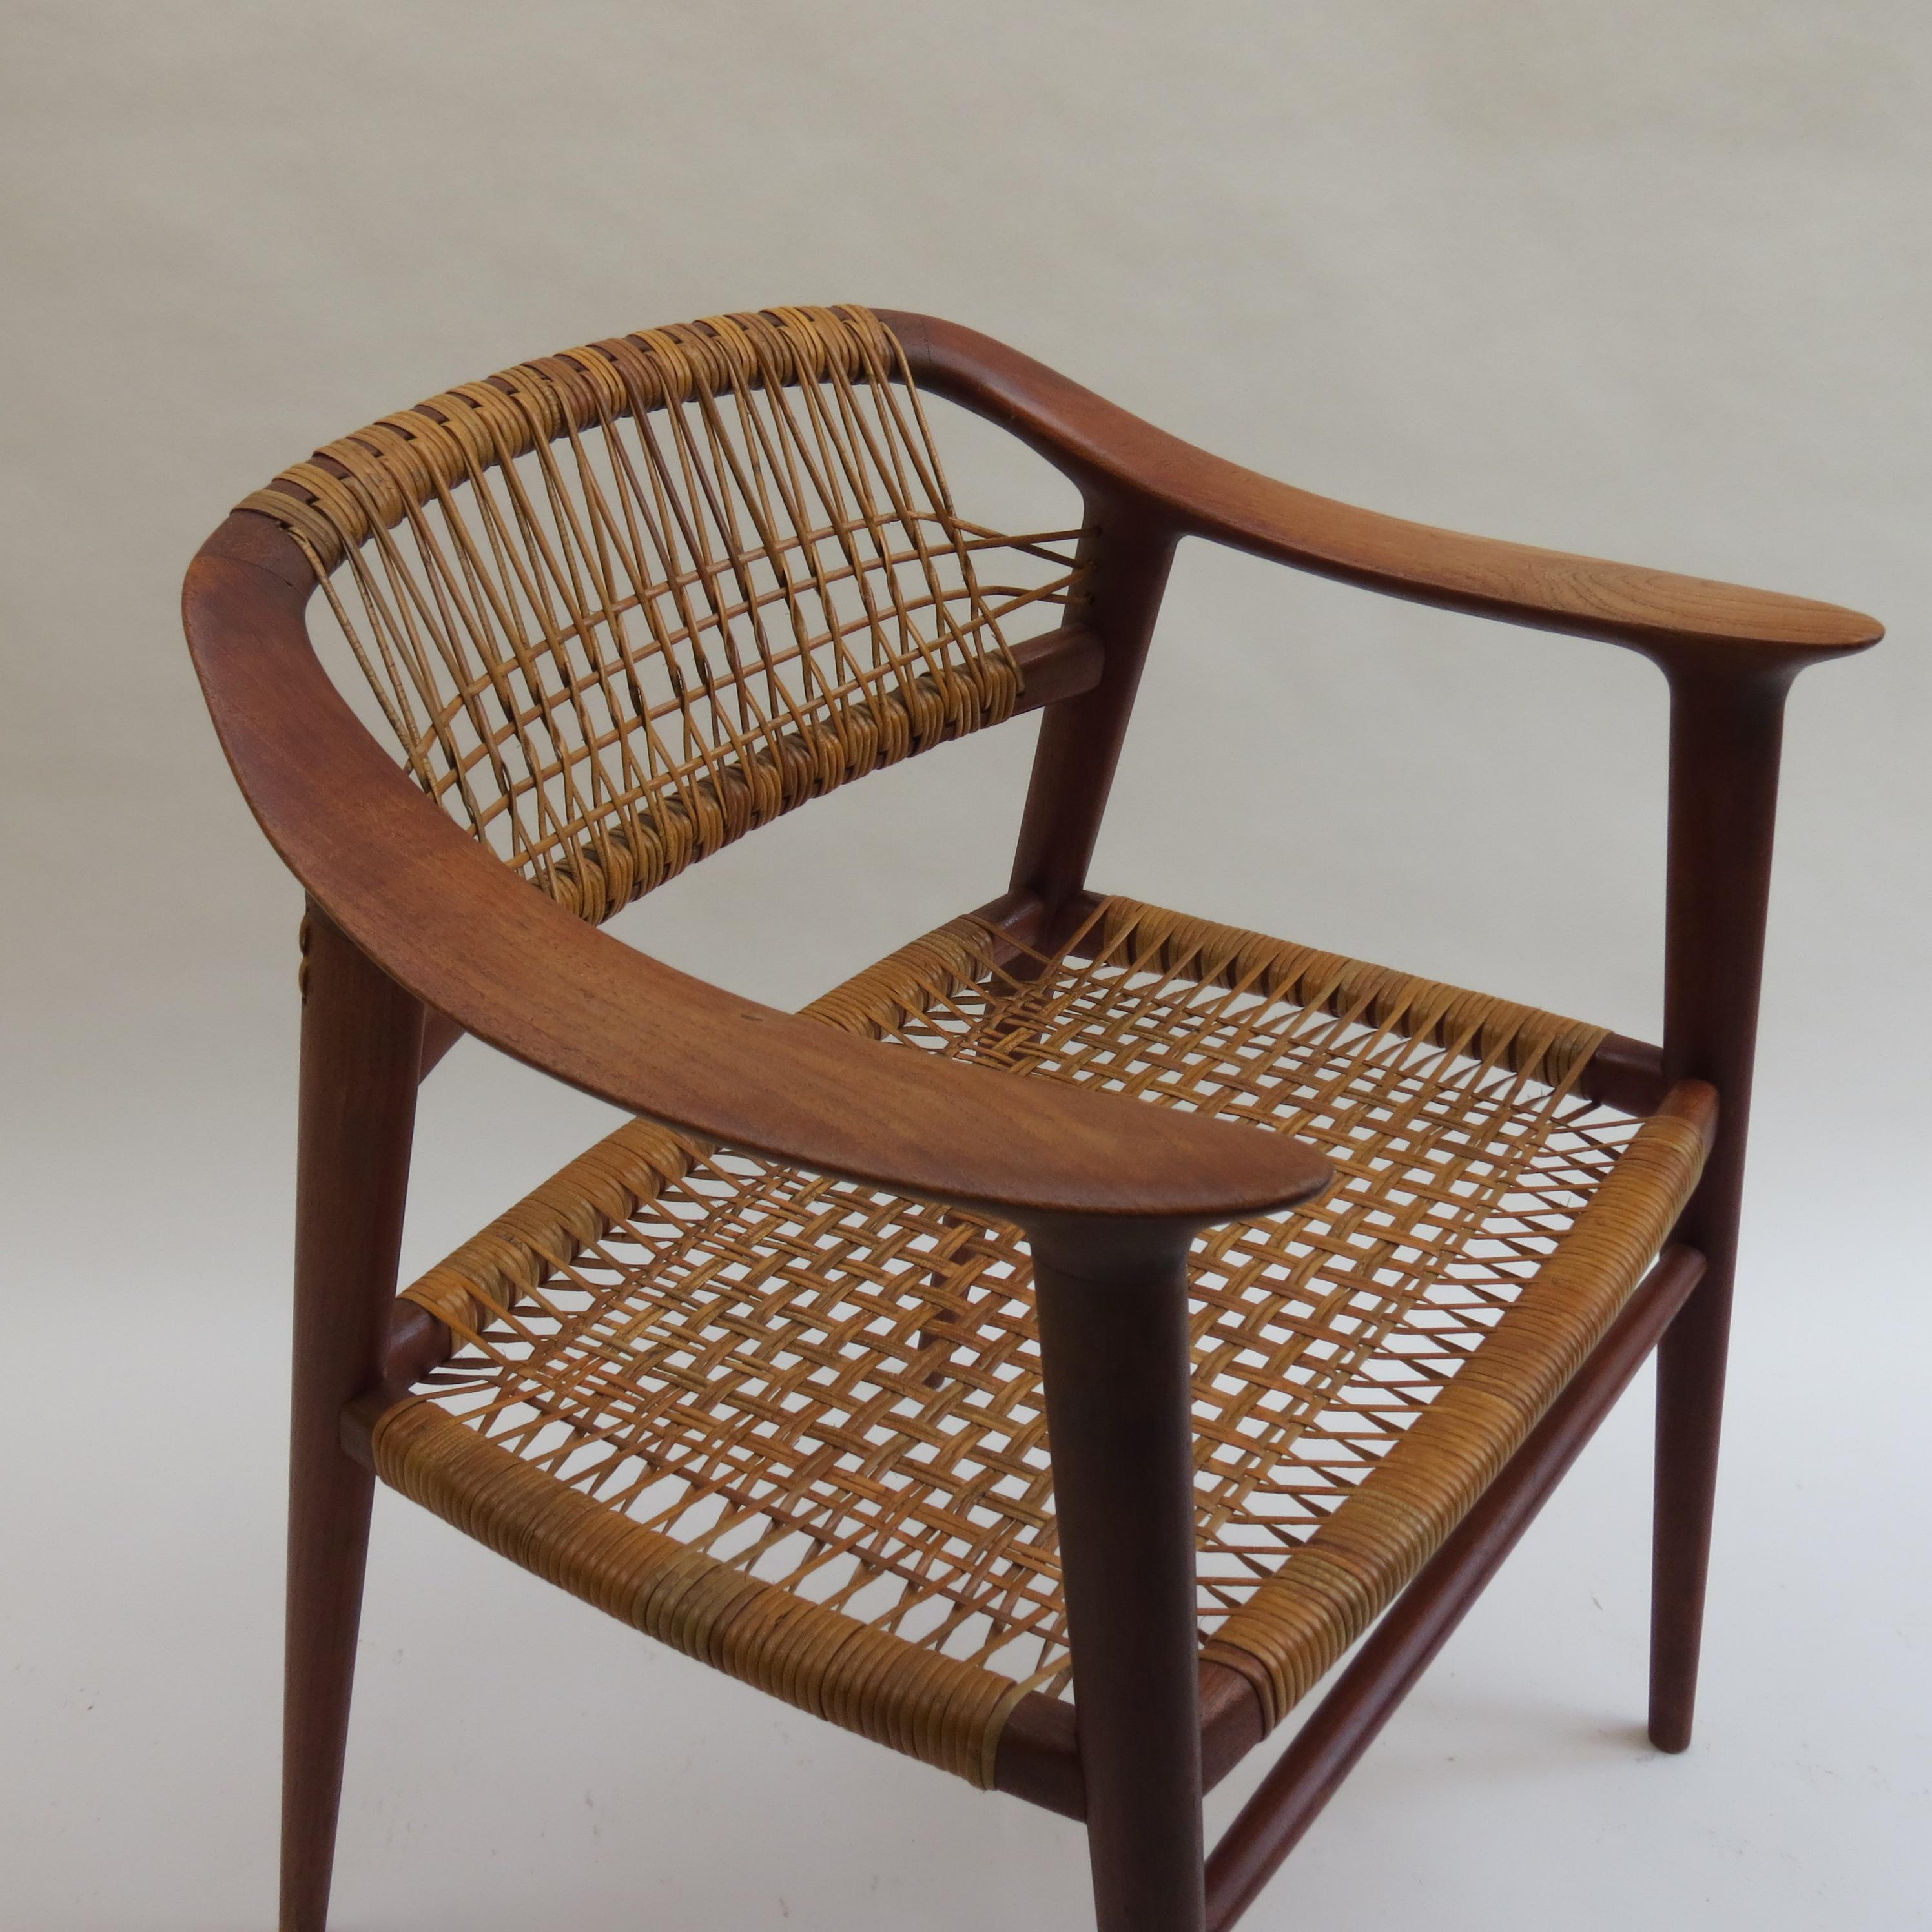 Bambi dining chair designed by Rolf Rastad and Adolf Relling and manufactured by Gustav Bahus of Norway. Designed in the 1950s.
Made from solid Teak with cane seat and back.
The chair is in good vintage condition, with a wonderfully rich warm